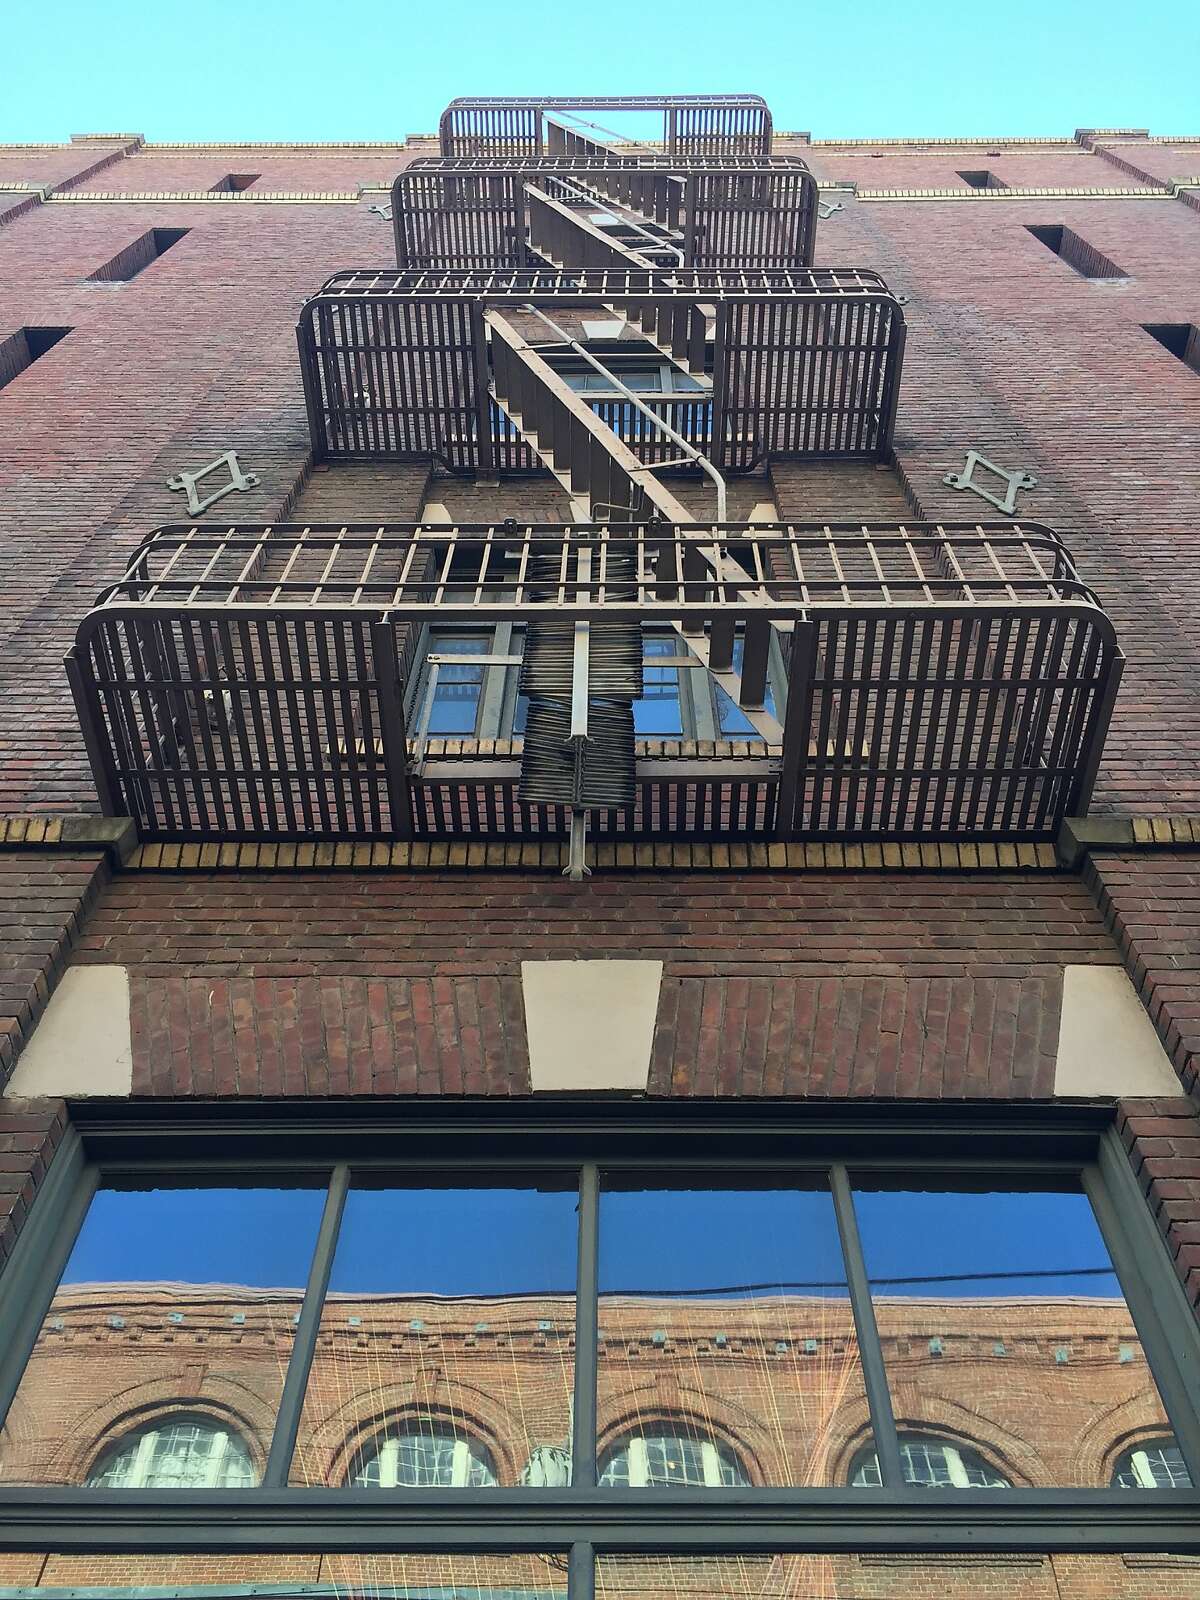 The view from 15th Street of 200 Rhode Island, a five story brick warehouse from 1912 that now holds a variety of firms.